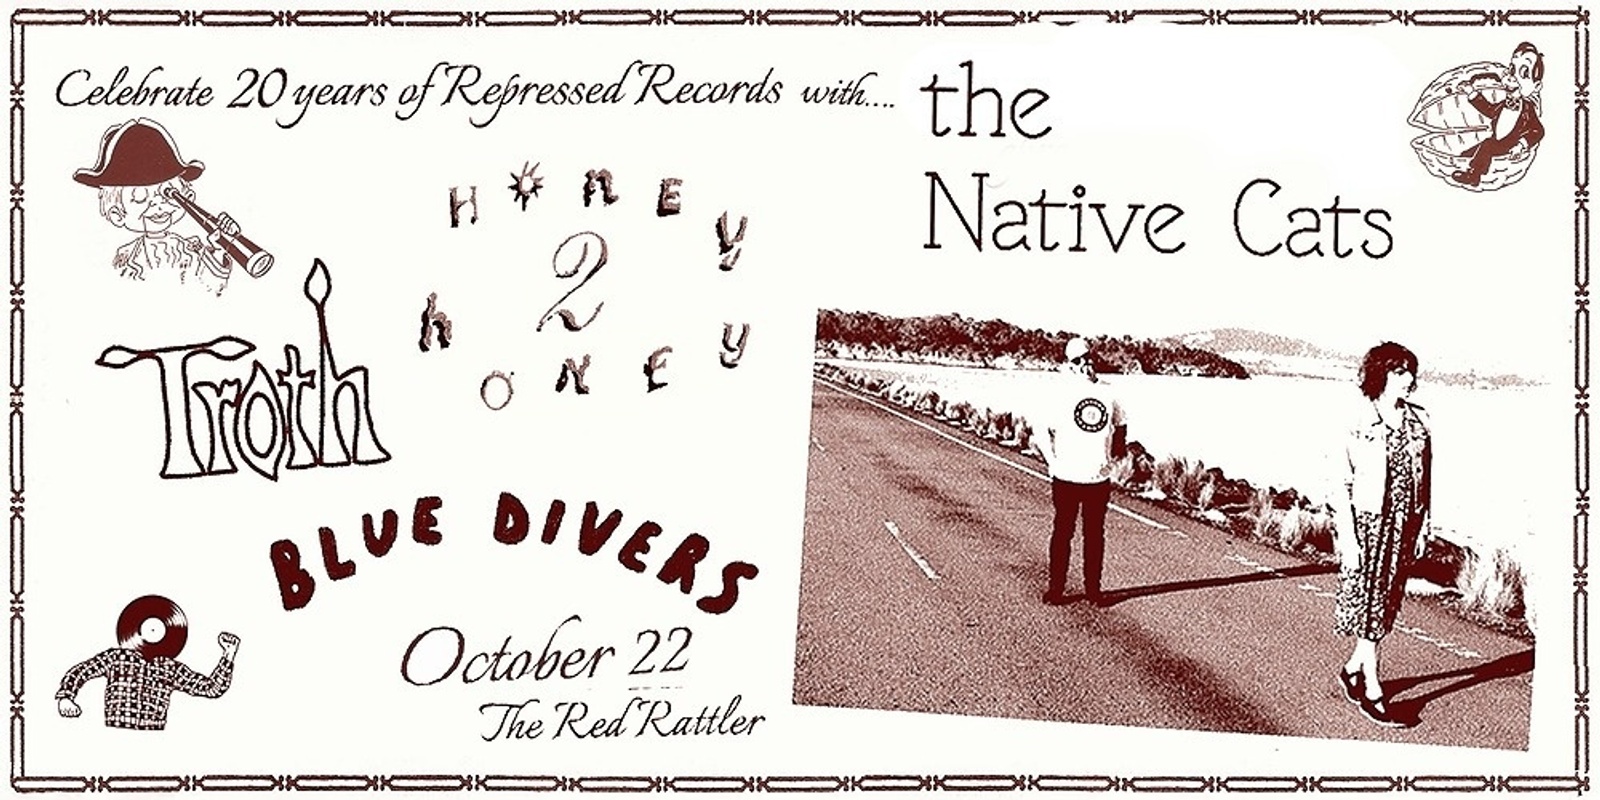 Banner image for 20 years of Repressed Records: The Native Cats, Troth, Honey 2 Honey